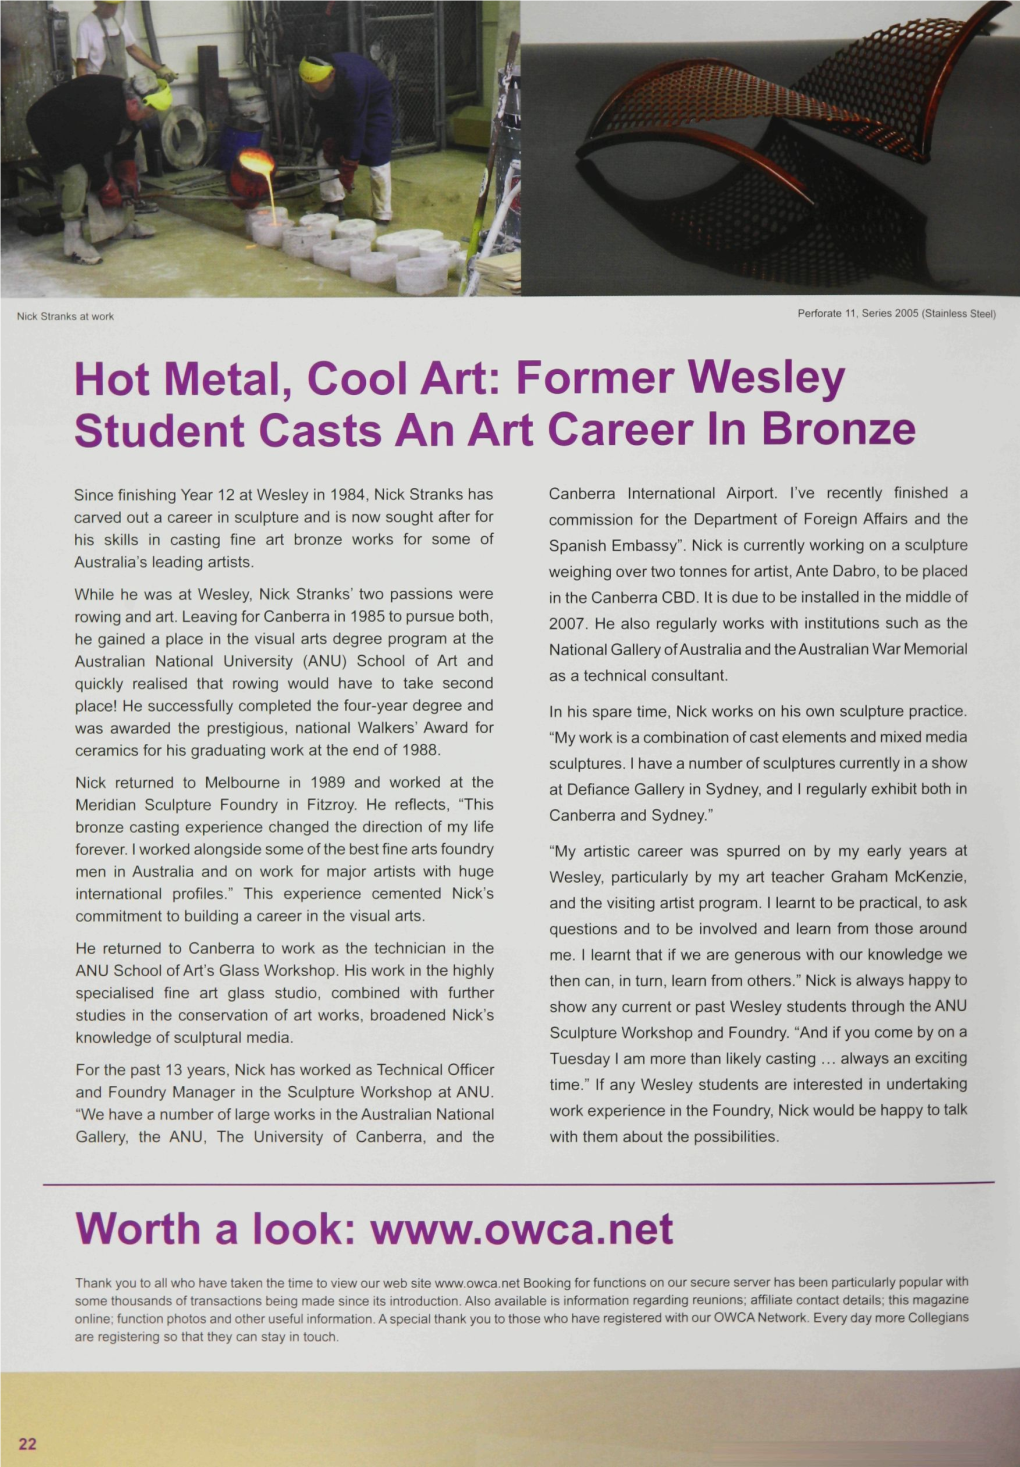 Former Wesley Student Casts an Art Career in Bronze Worth a Look